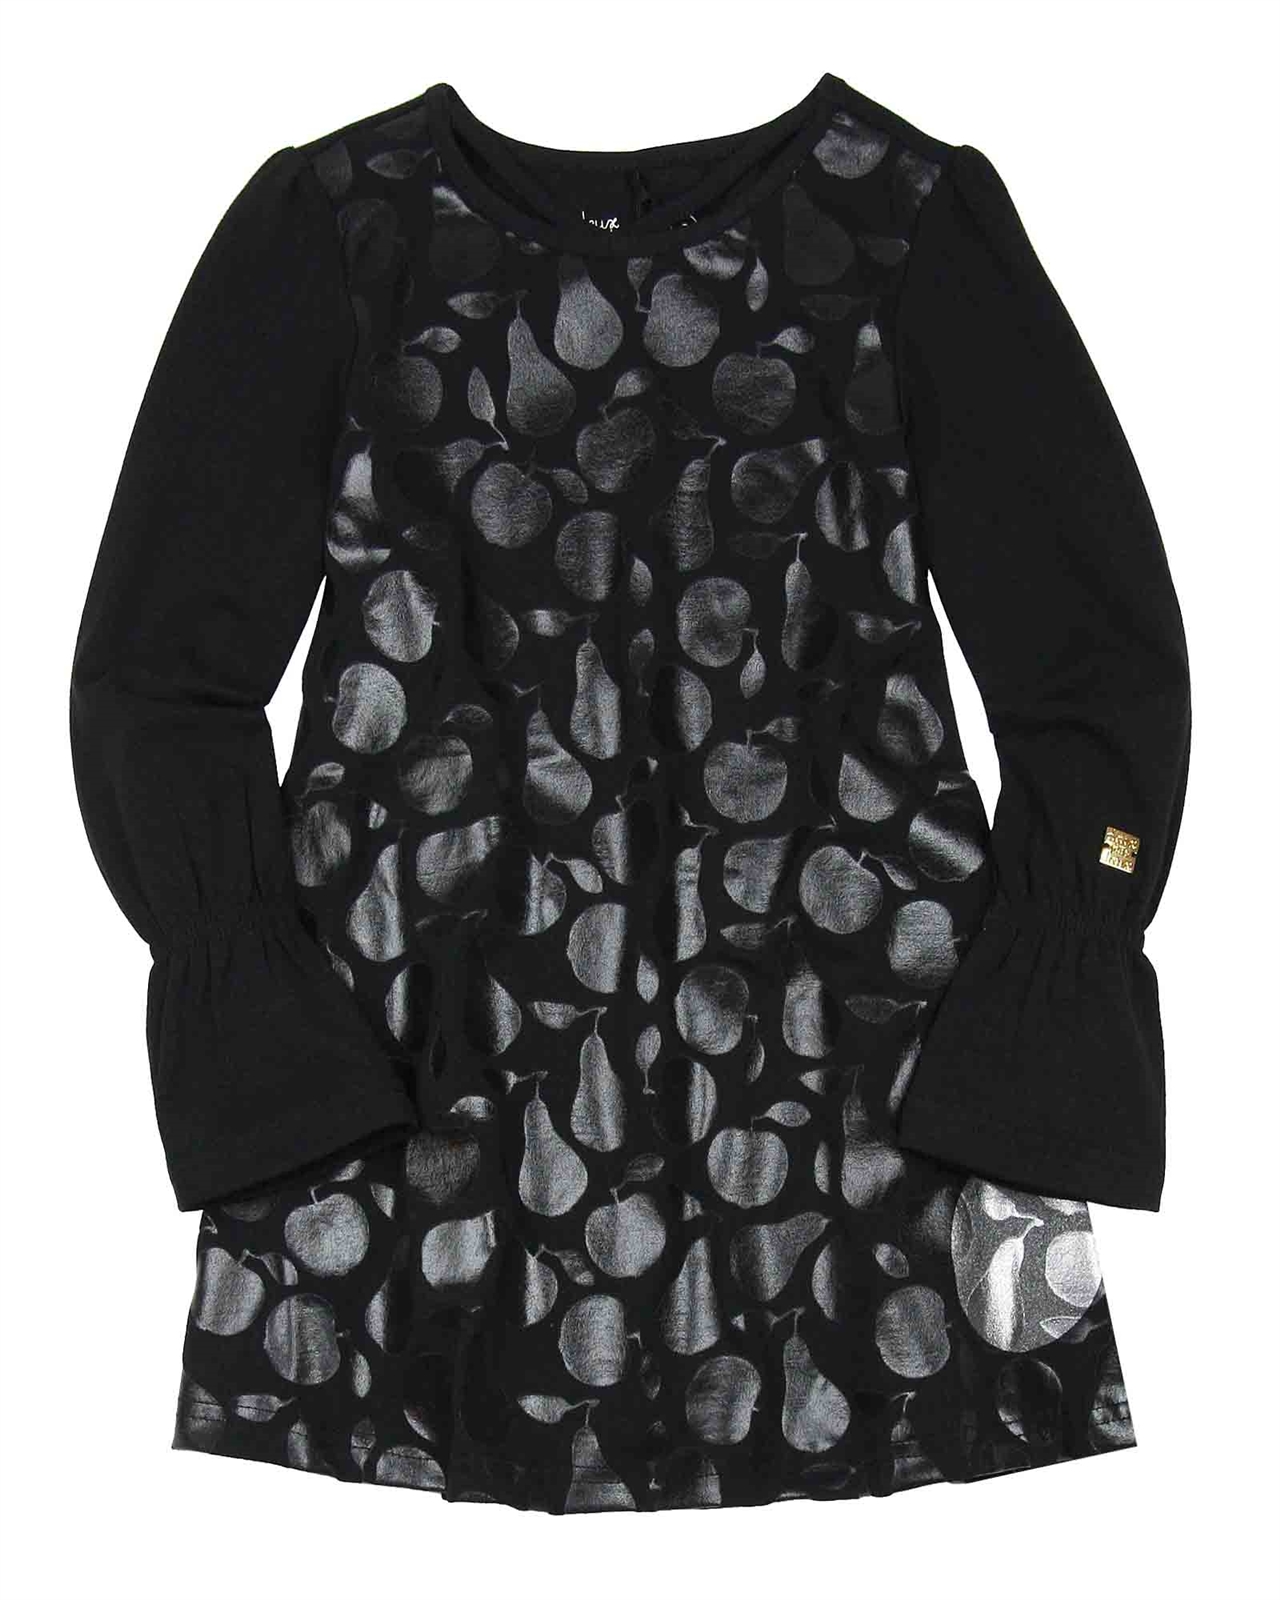 Sizes 6-12 Deux par Deux Girls Tunic in Apples and Pears Print Black and White